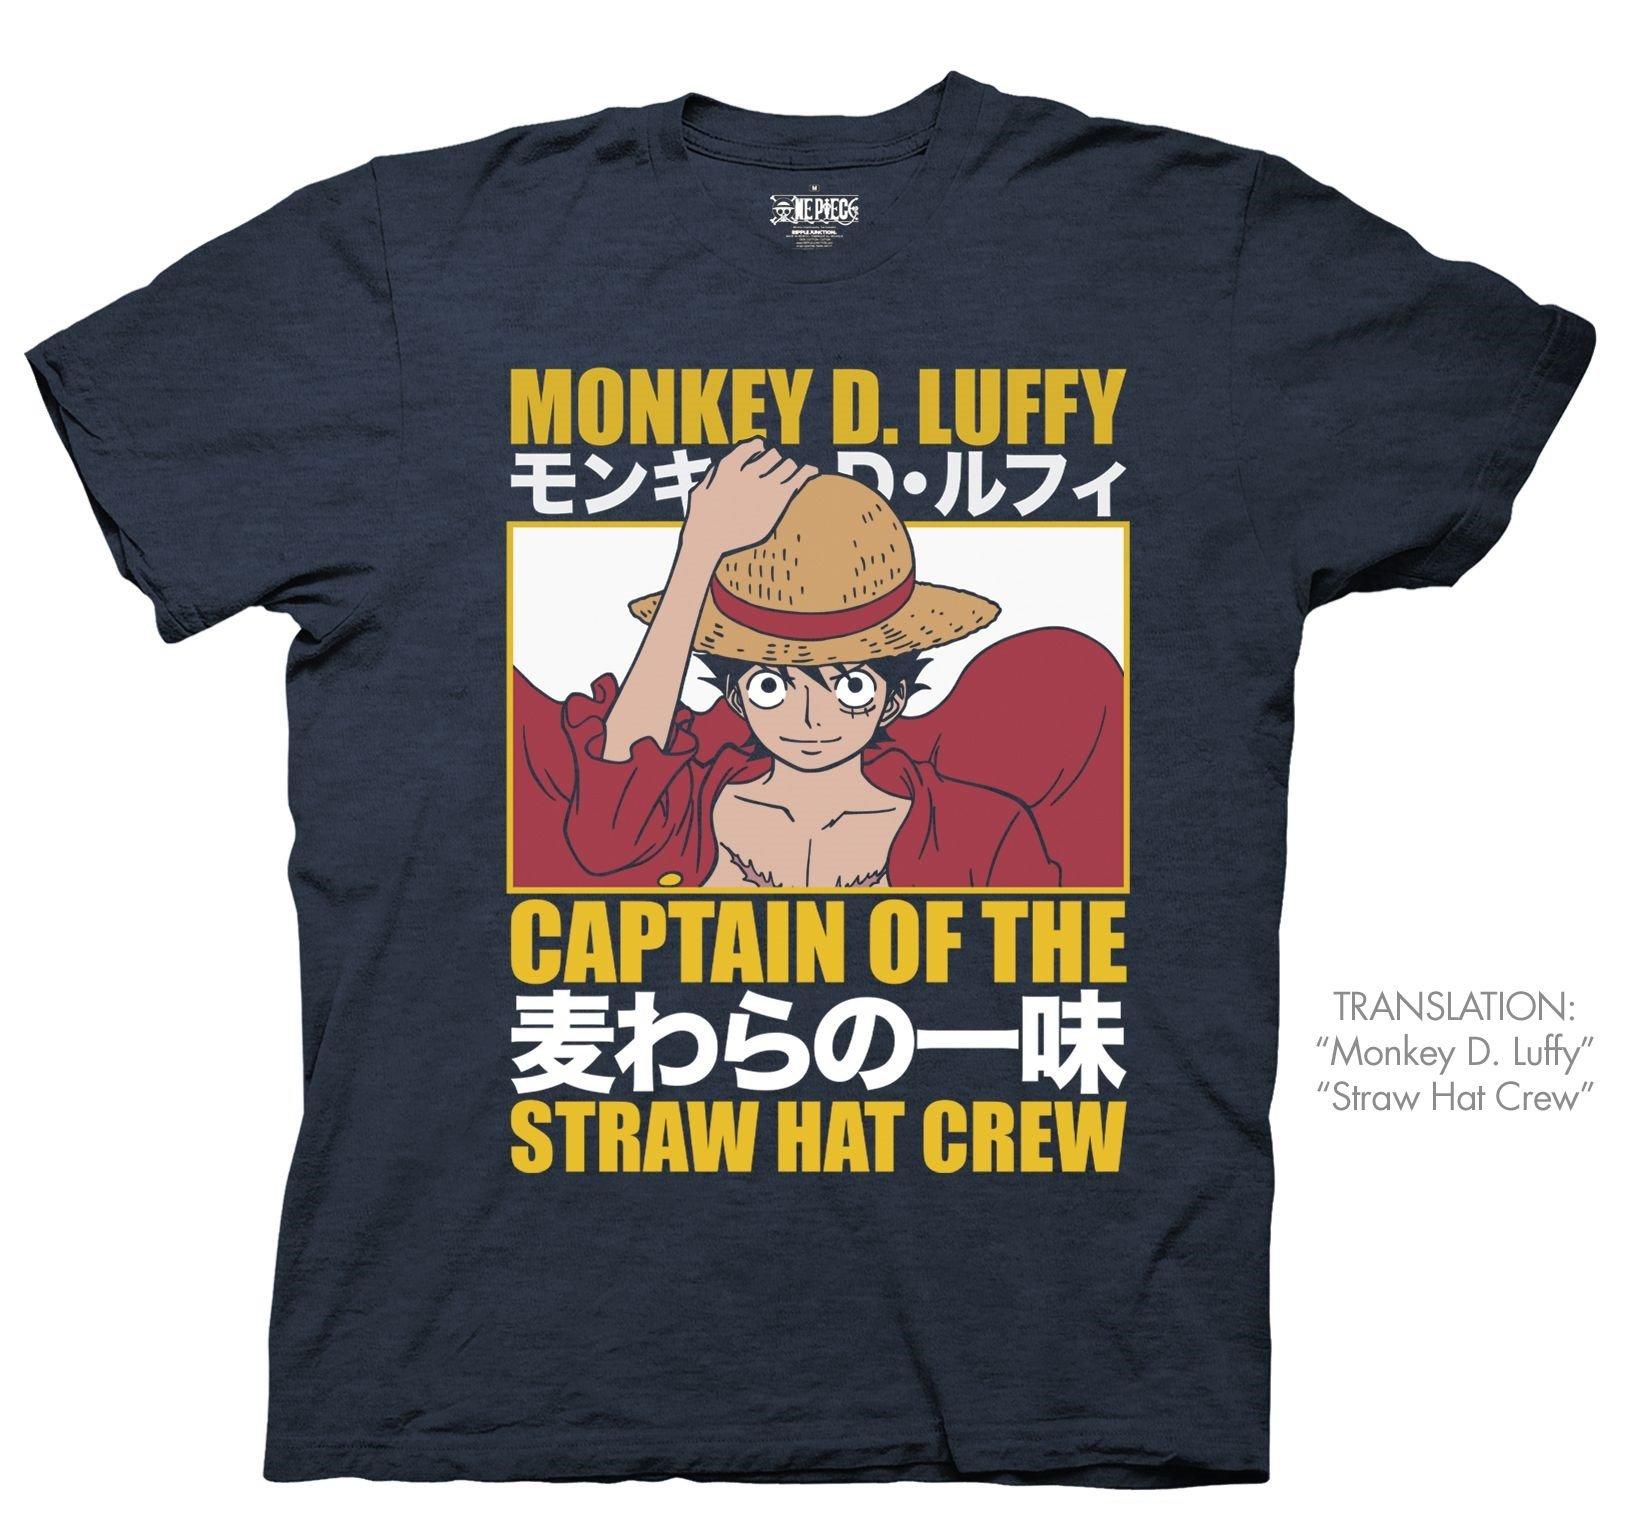 One Piece Monkey D Luffy Cosplay Costume with Hat Book Week